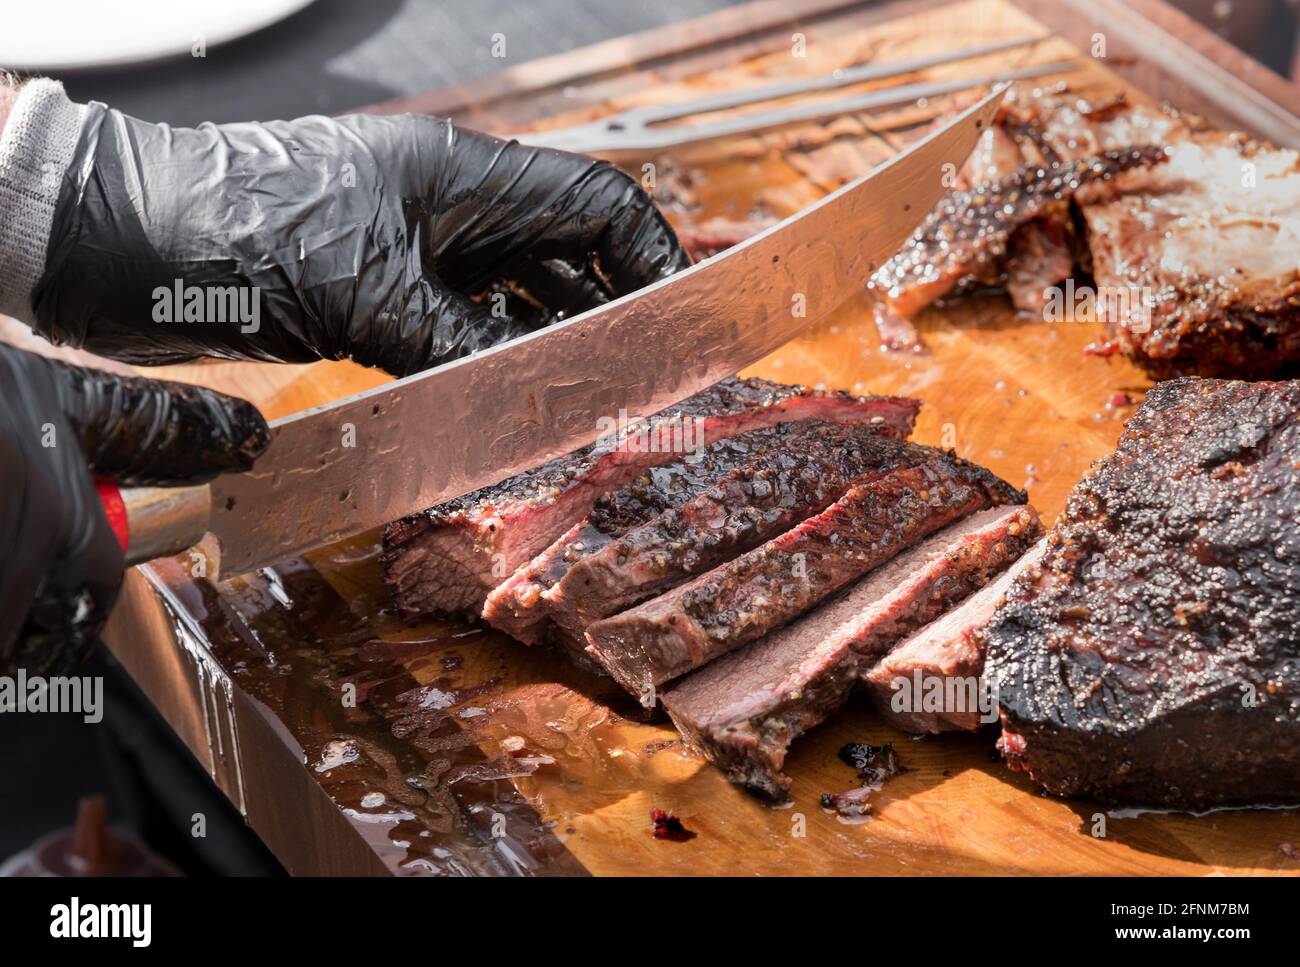 Gloved hands of a chef slicing a portion of delicious juicy tender roast beef brisket with a large knife in a close up on the blade and cutting board Stock Photo